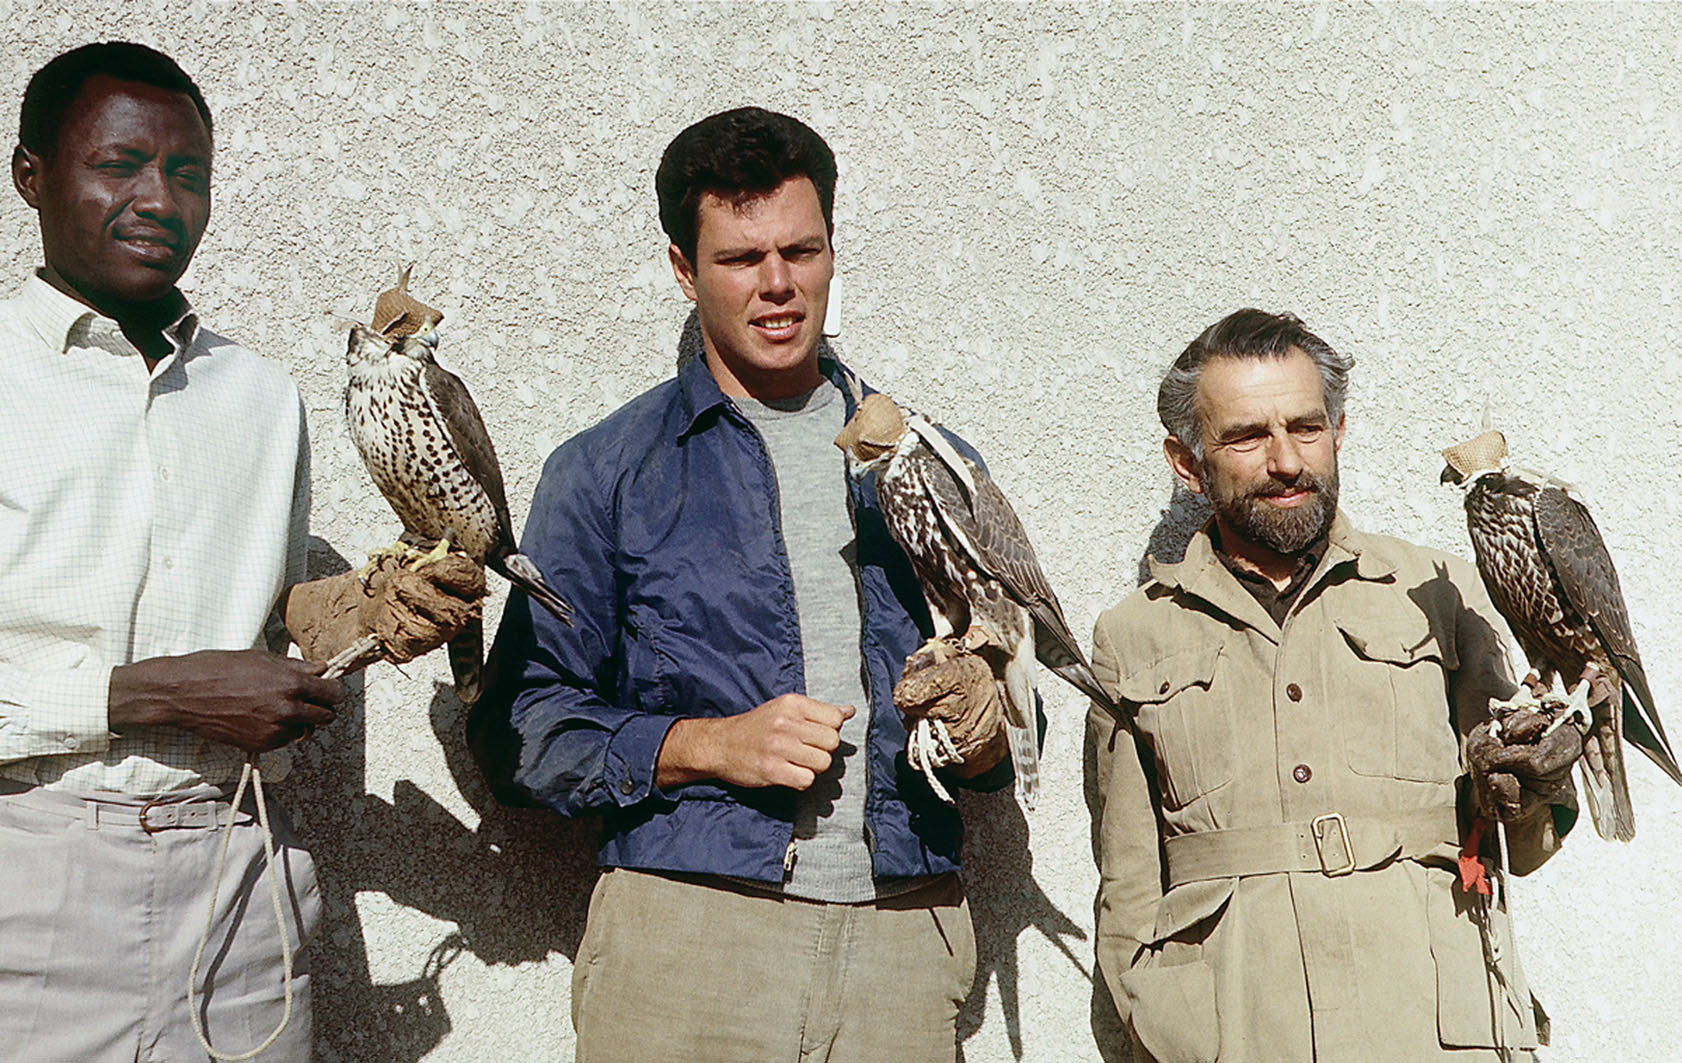 A Young Falconer's Walkabout: hitchhiking through Europe and Africa in the sixties